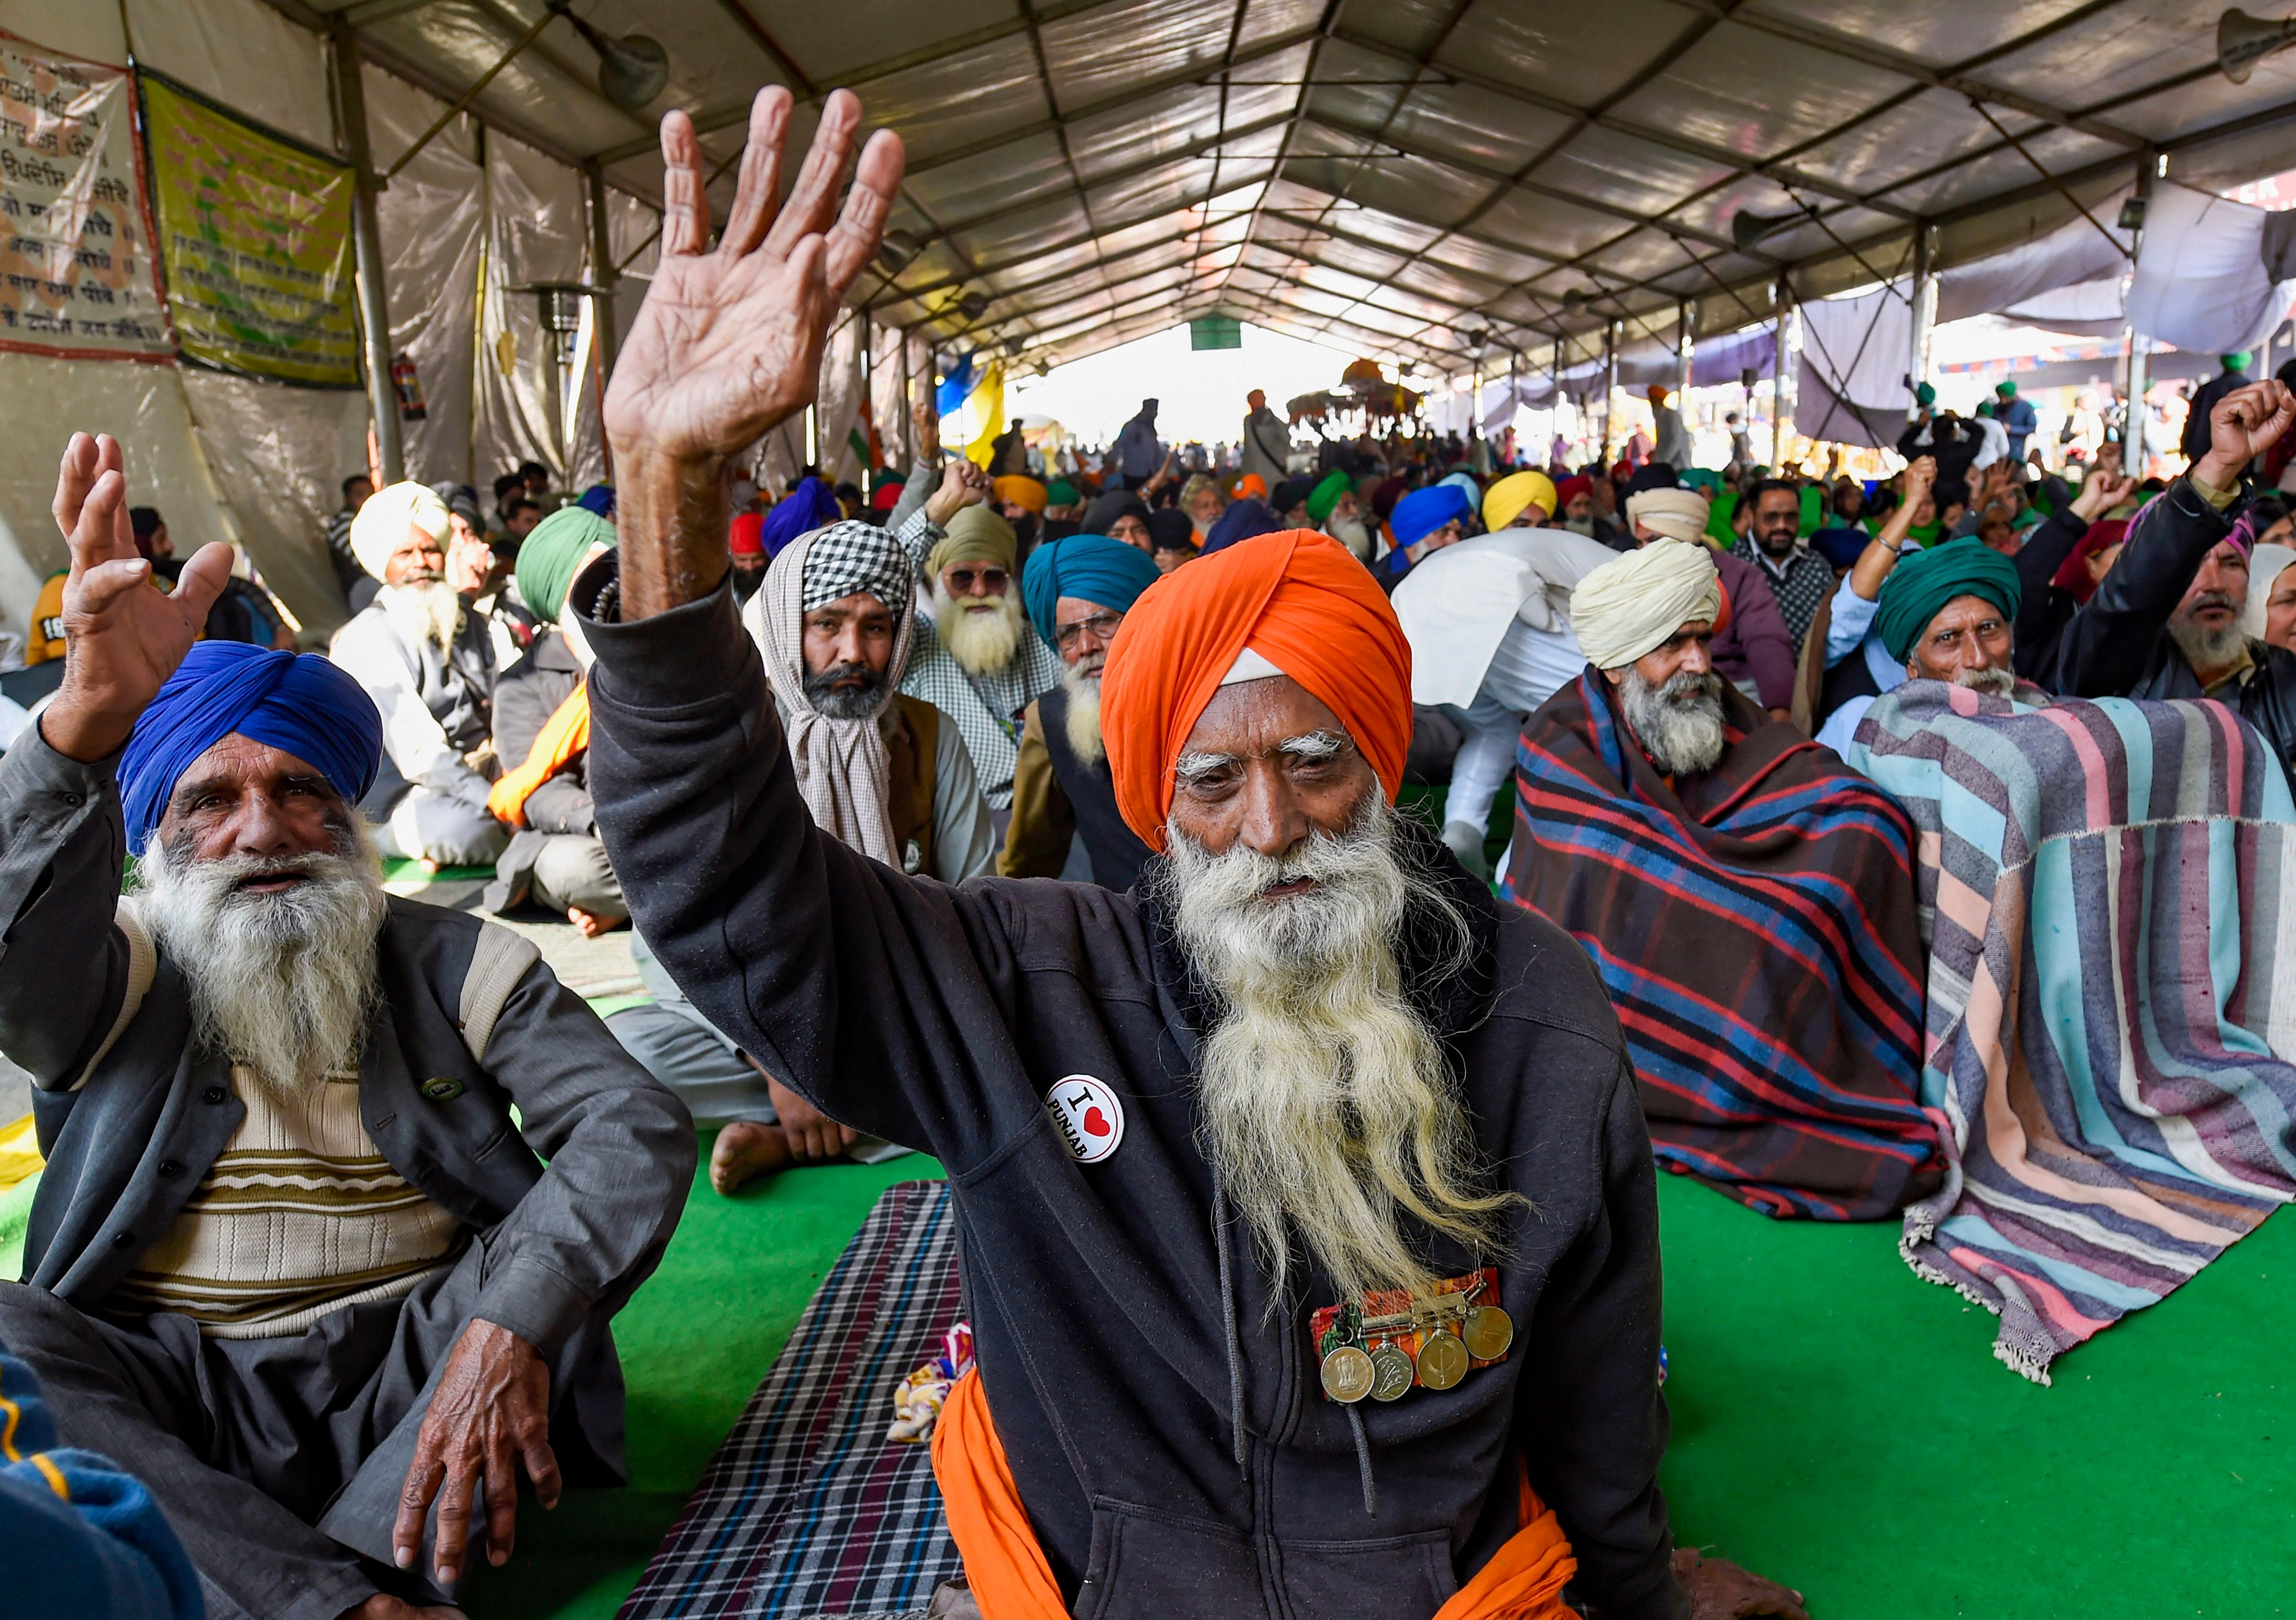 Farmers during their ongoing protest against the Centre's new farm laws, at Singhu border in New Delhi, Thursday, Jan 21, 2021. Credit: PTI Photo